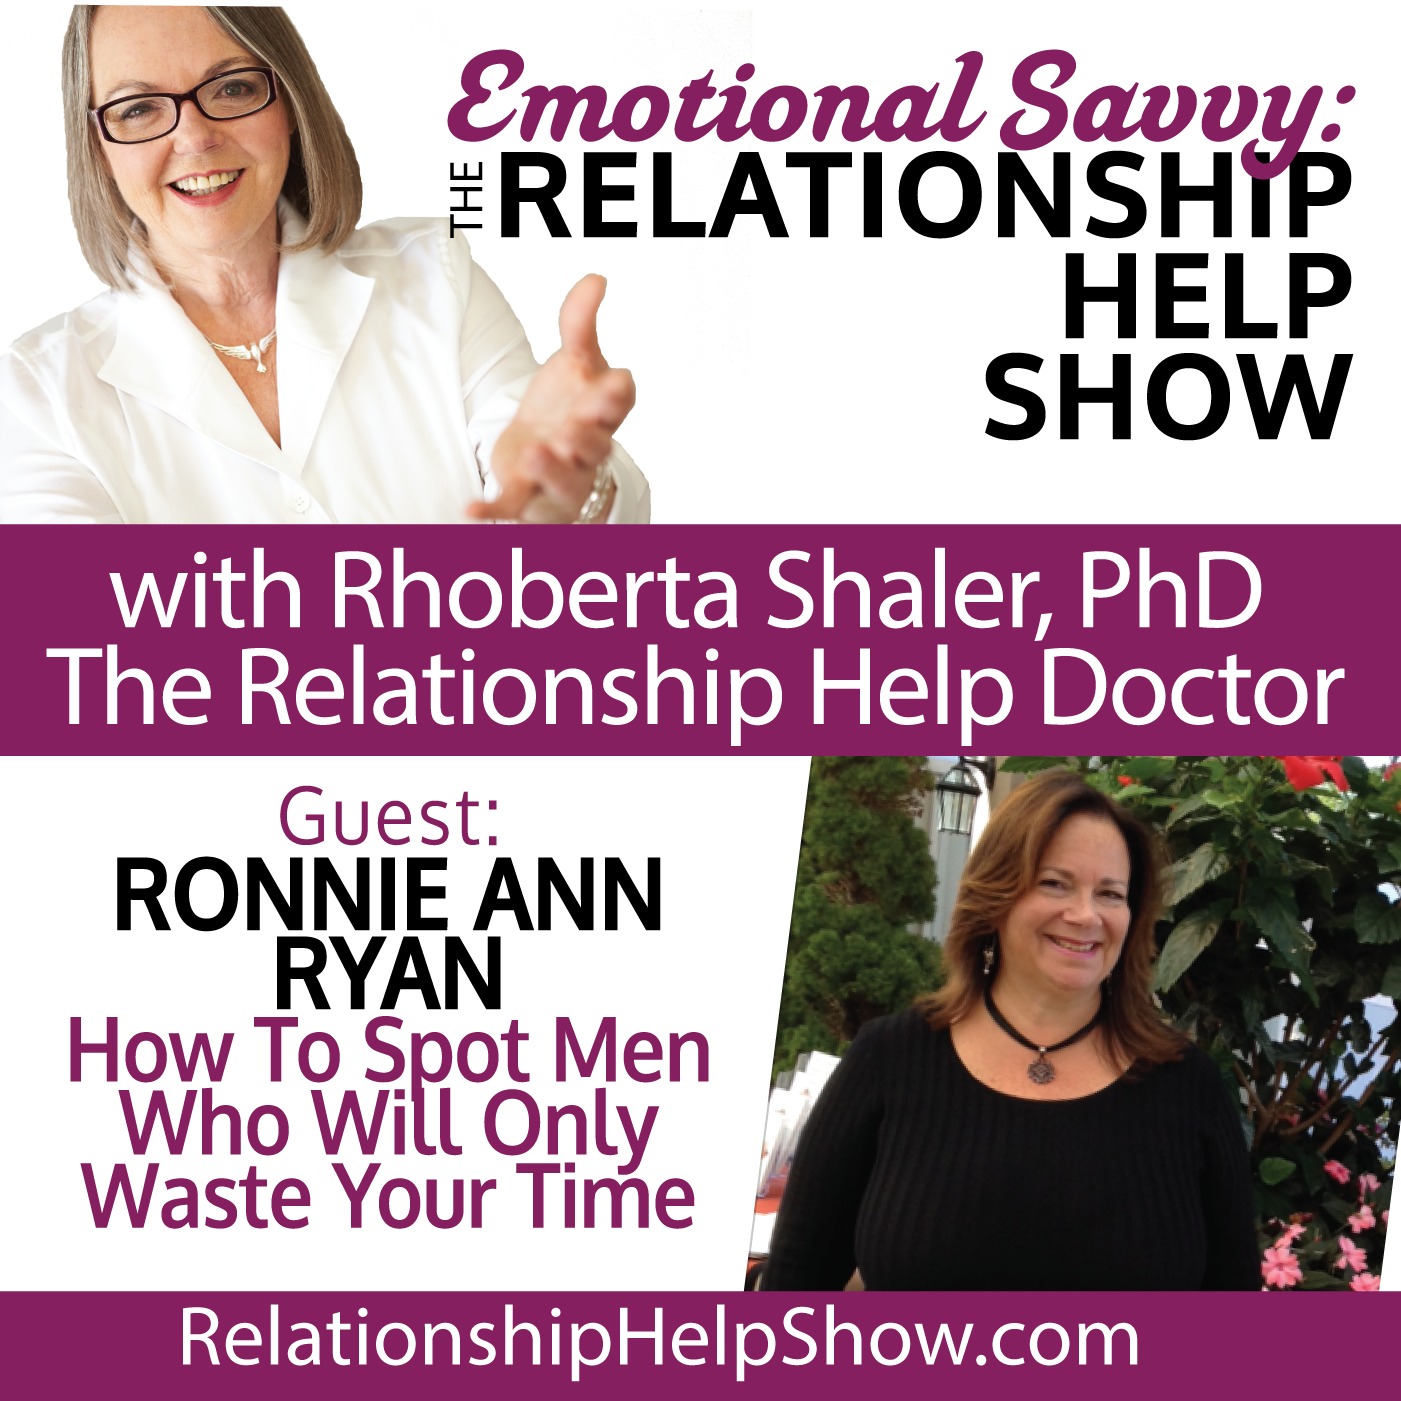 Dating? How to Spot Men Who'll Only Waste Your Time  GUEST Ronnie Ann Ryan